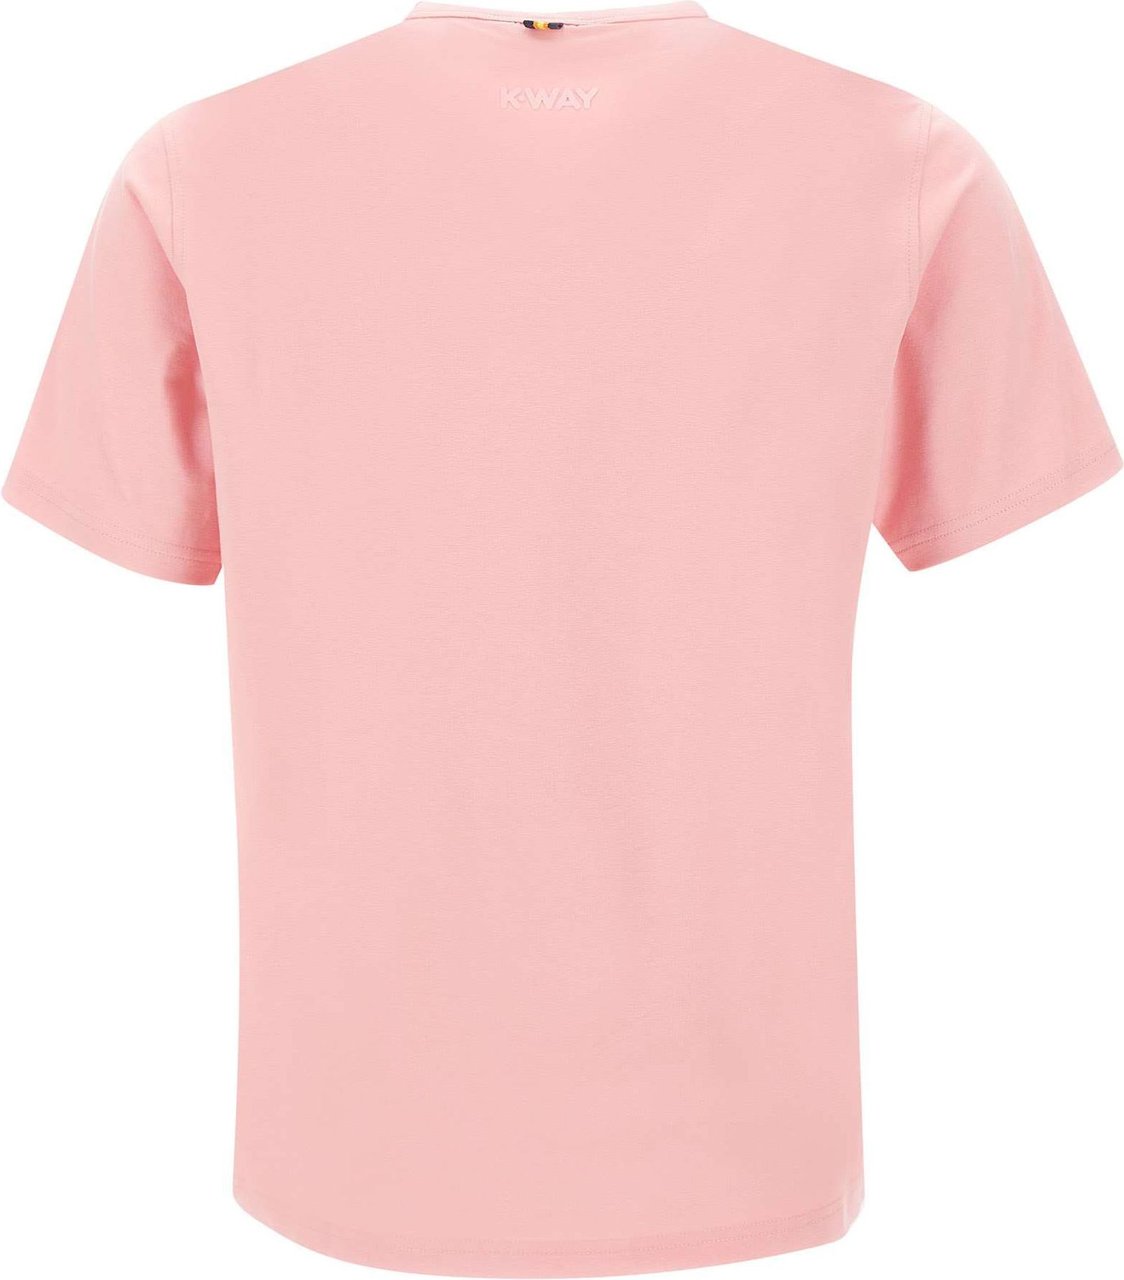 K-WAY T-shirts And Polos Pink Roze